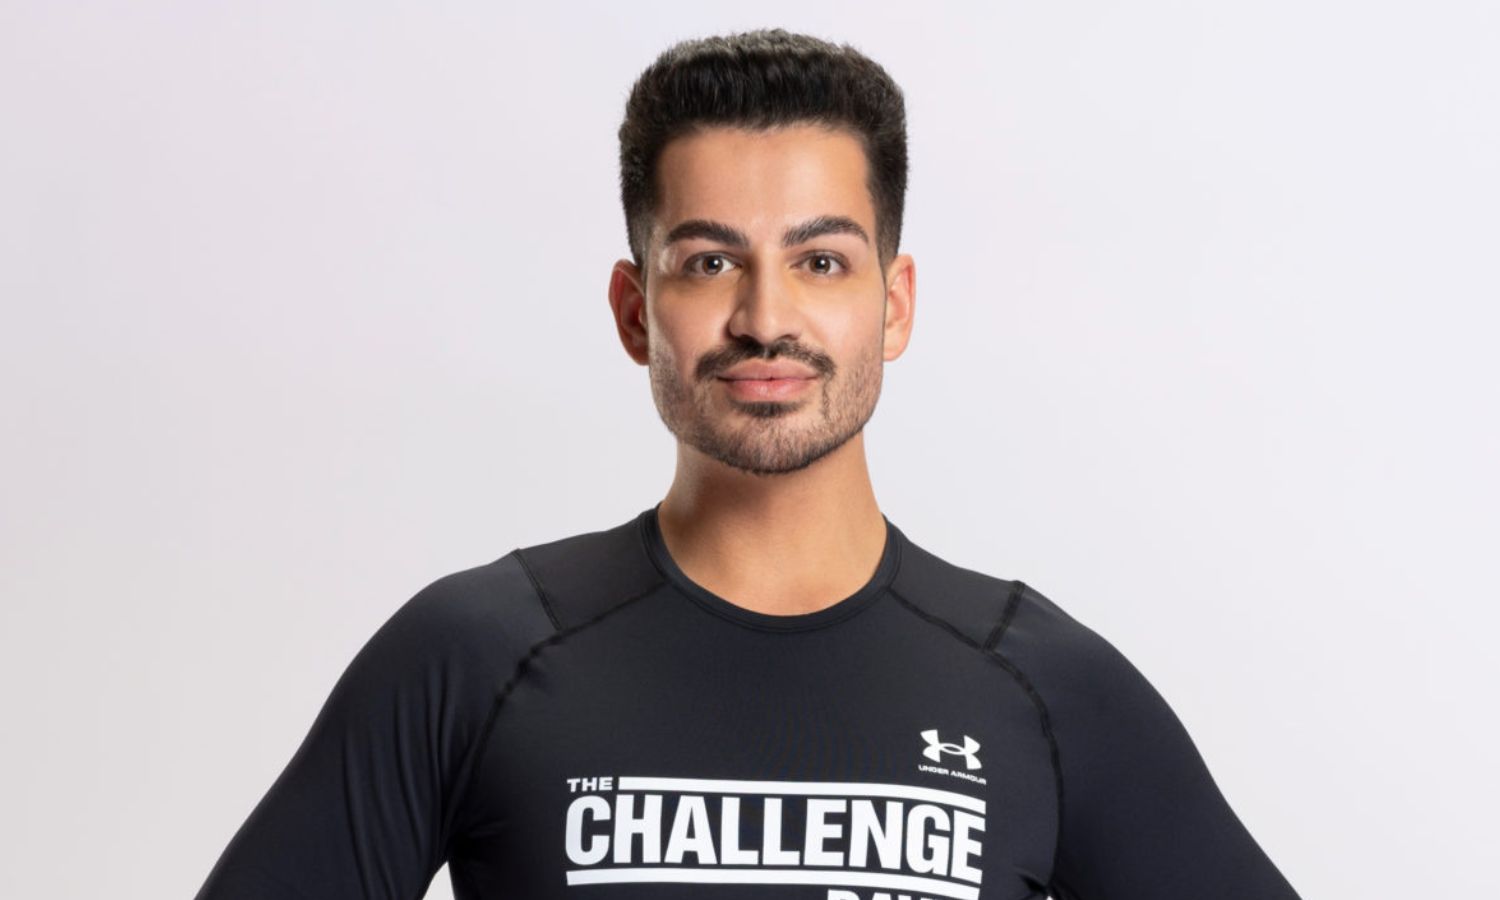 David Subritzky the challenge eliminated